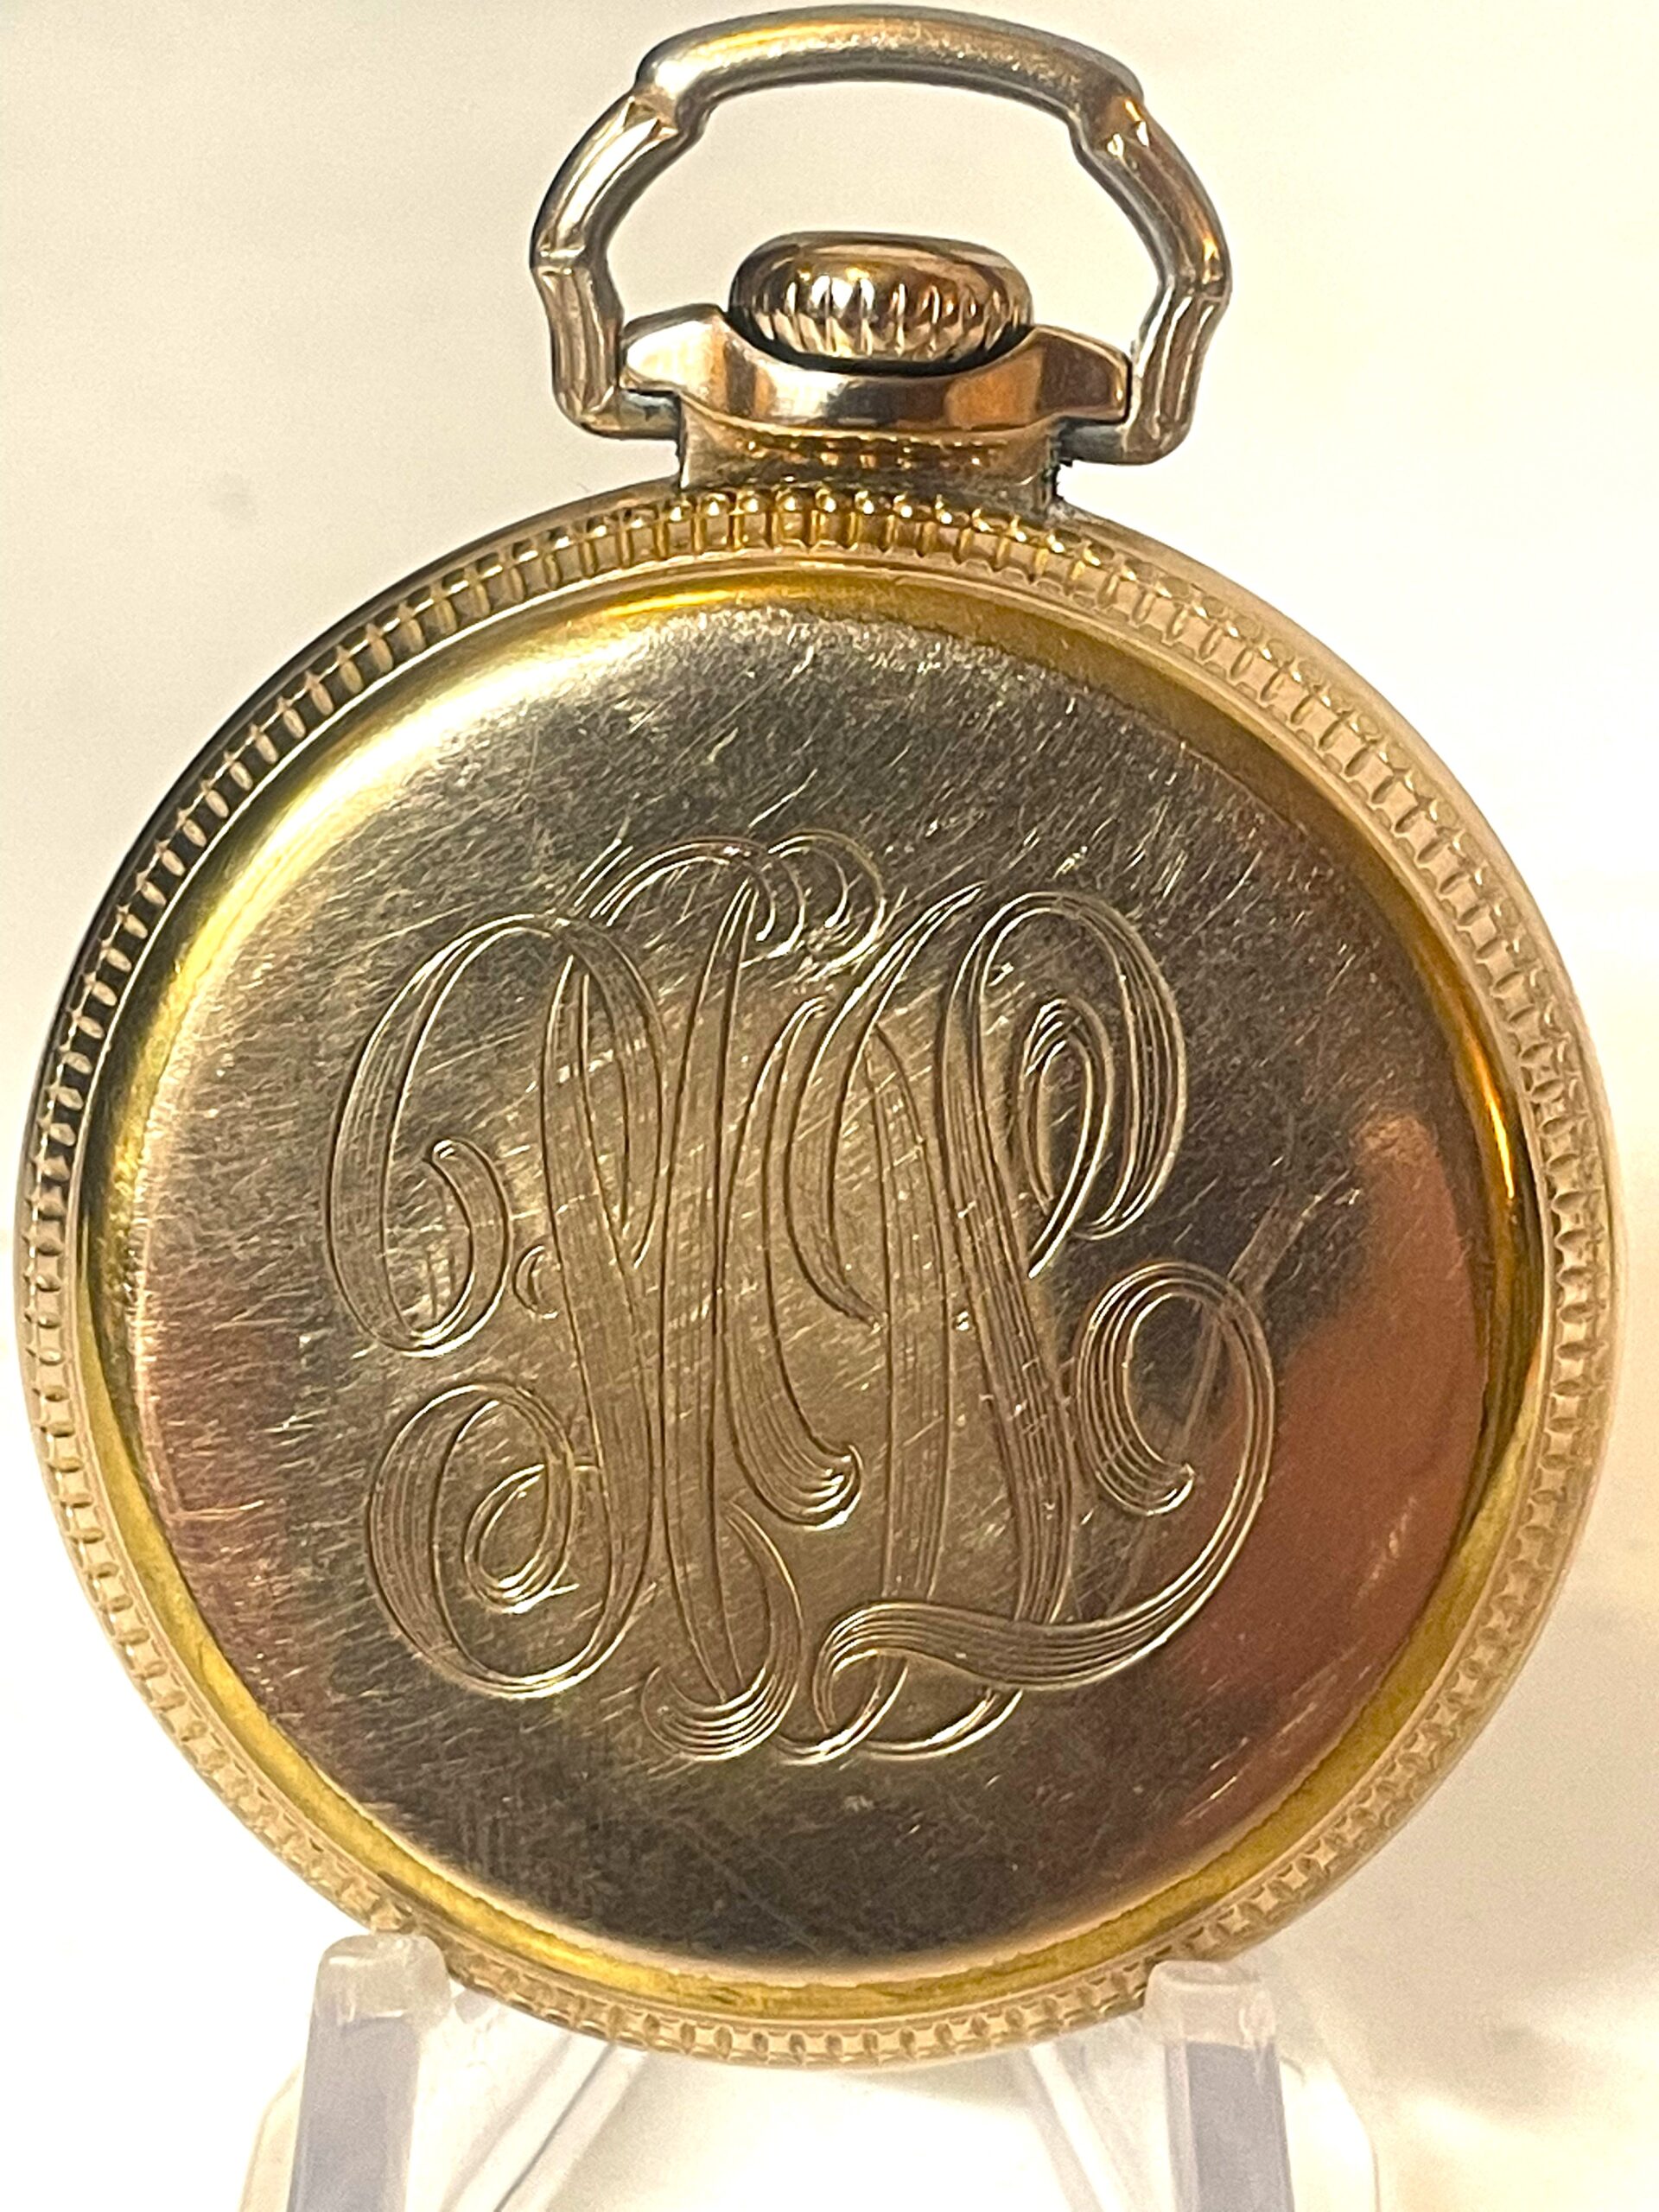 Illinois 60 Hour Bunn Special Railroad Pocket Watch – 4-4 Time